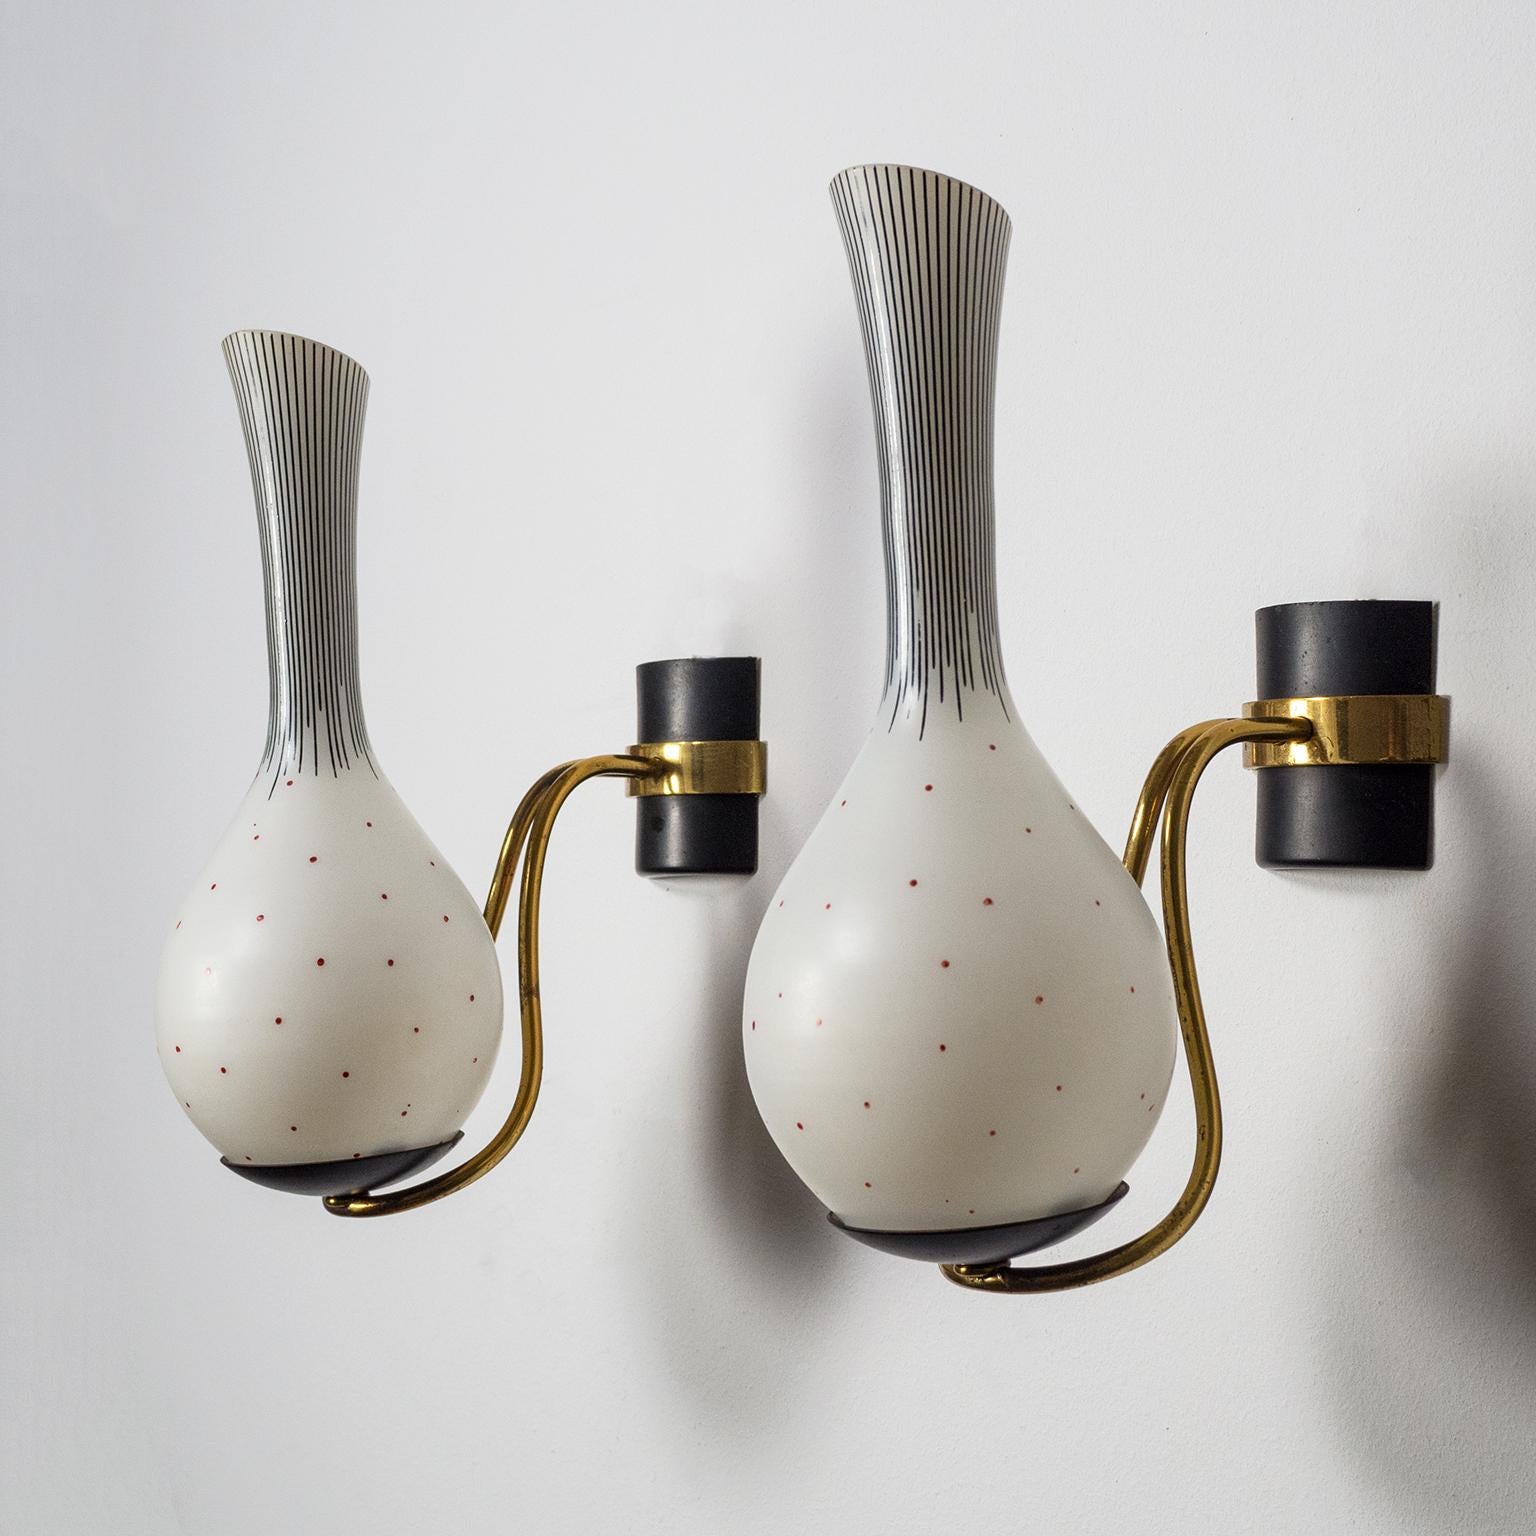 Lovely pair of 1950s Italian brass sconces with very unique hand painted glass diffusers, fine black lines of varying lengths on the long 'neck' and irregular red dots around the body. In combination with the curved brass stems these wall lights